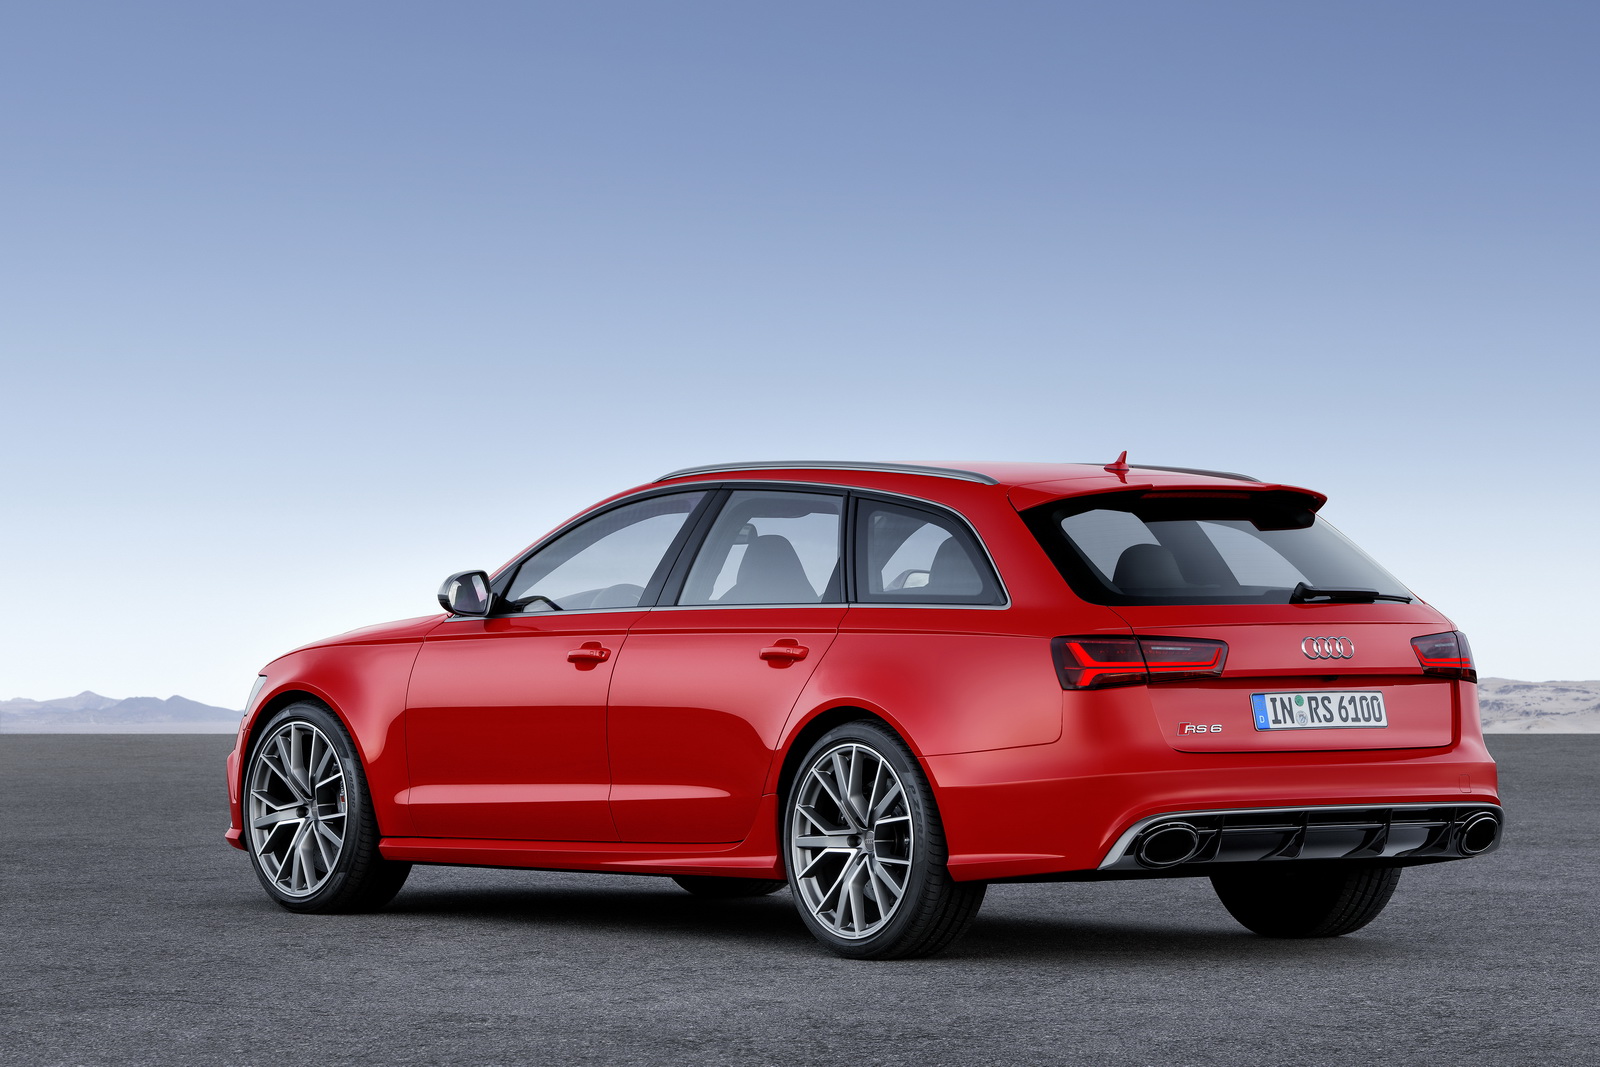 Audi Boosts RS6 Avant & RS7 Performance Editions To 605hp | Carscoops1600 x 1067